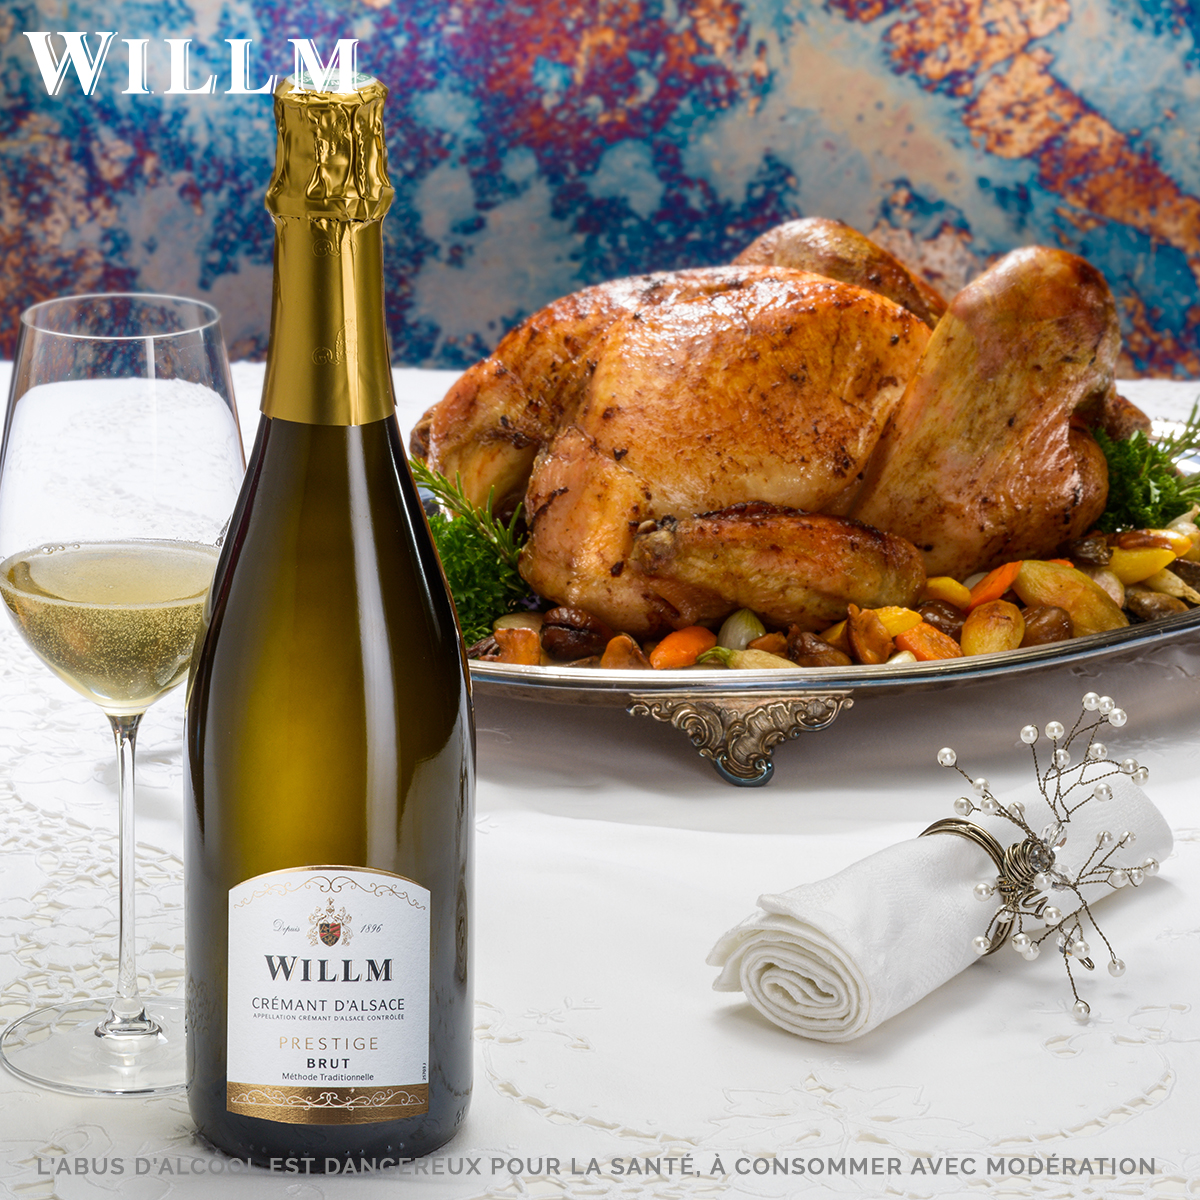 Looking for inspiration for your festive meals? Accompany your traditional #turkey with our #Crémant d'Alsace Prestige! Produced according to the traditional method, the Crémant d'Alsace Prestige has a beautiful complexity with persistent brioche notes. #drinkalsace #alsacerocks